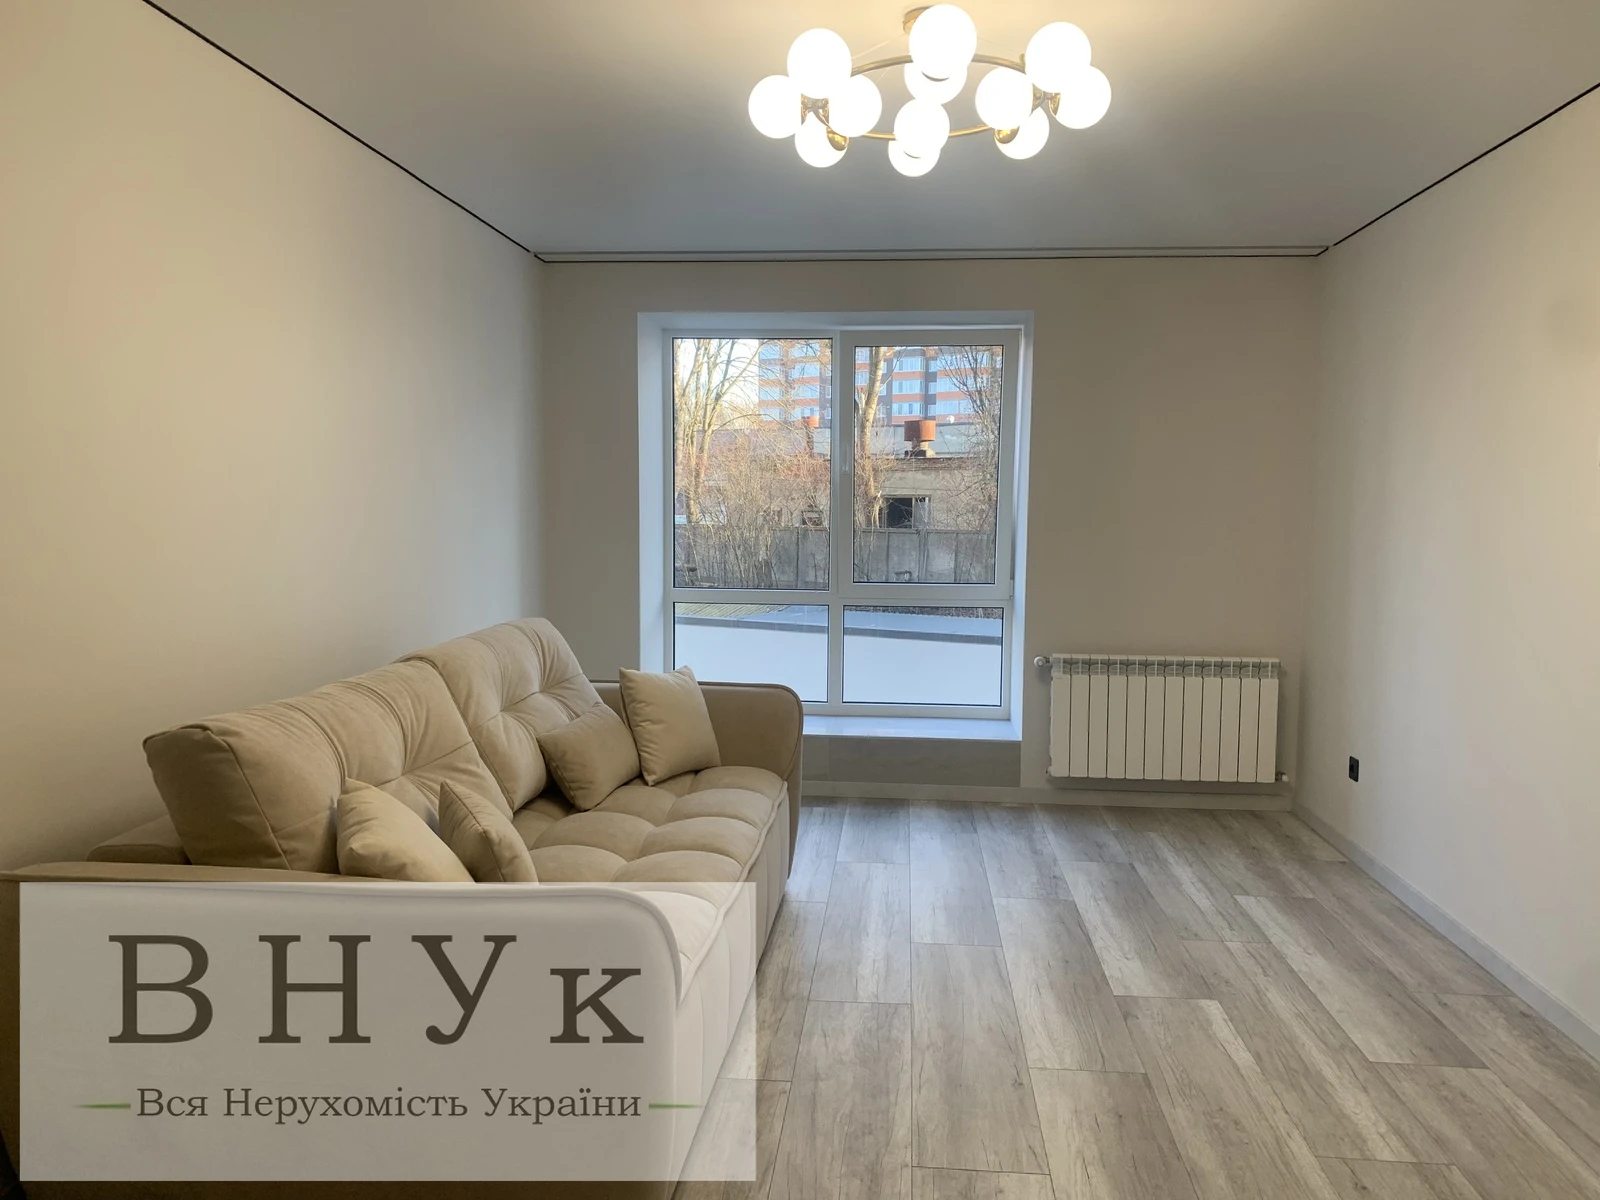 Apartments for sale. 2 rooms, 69 m², 2nd floor/11 floors. Budnoho S. , Ternopil. 